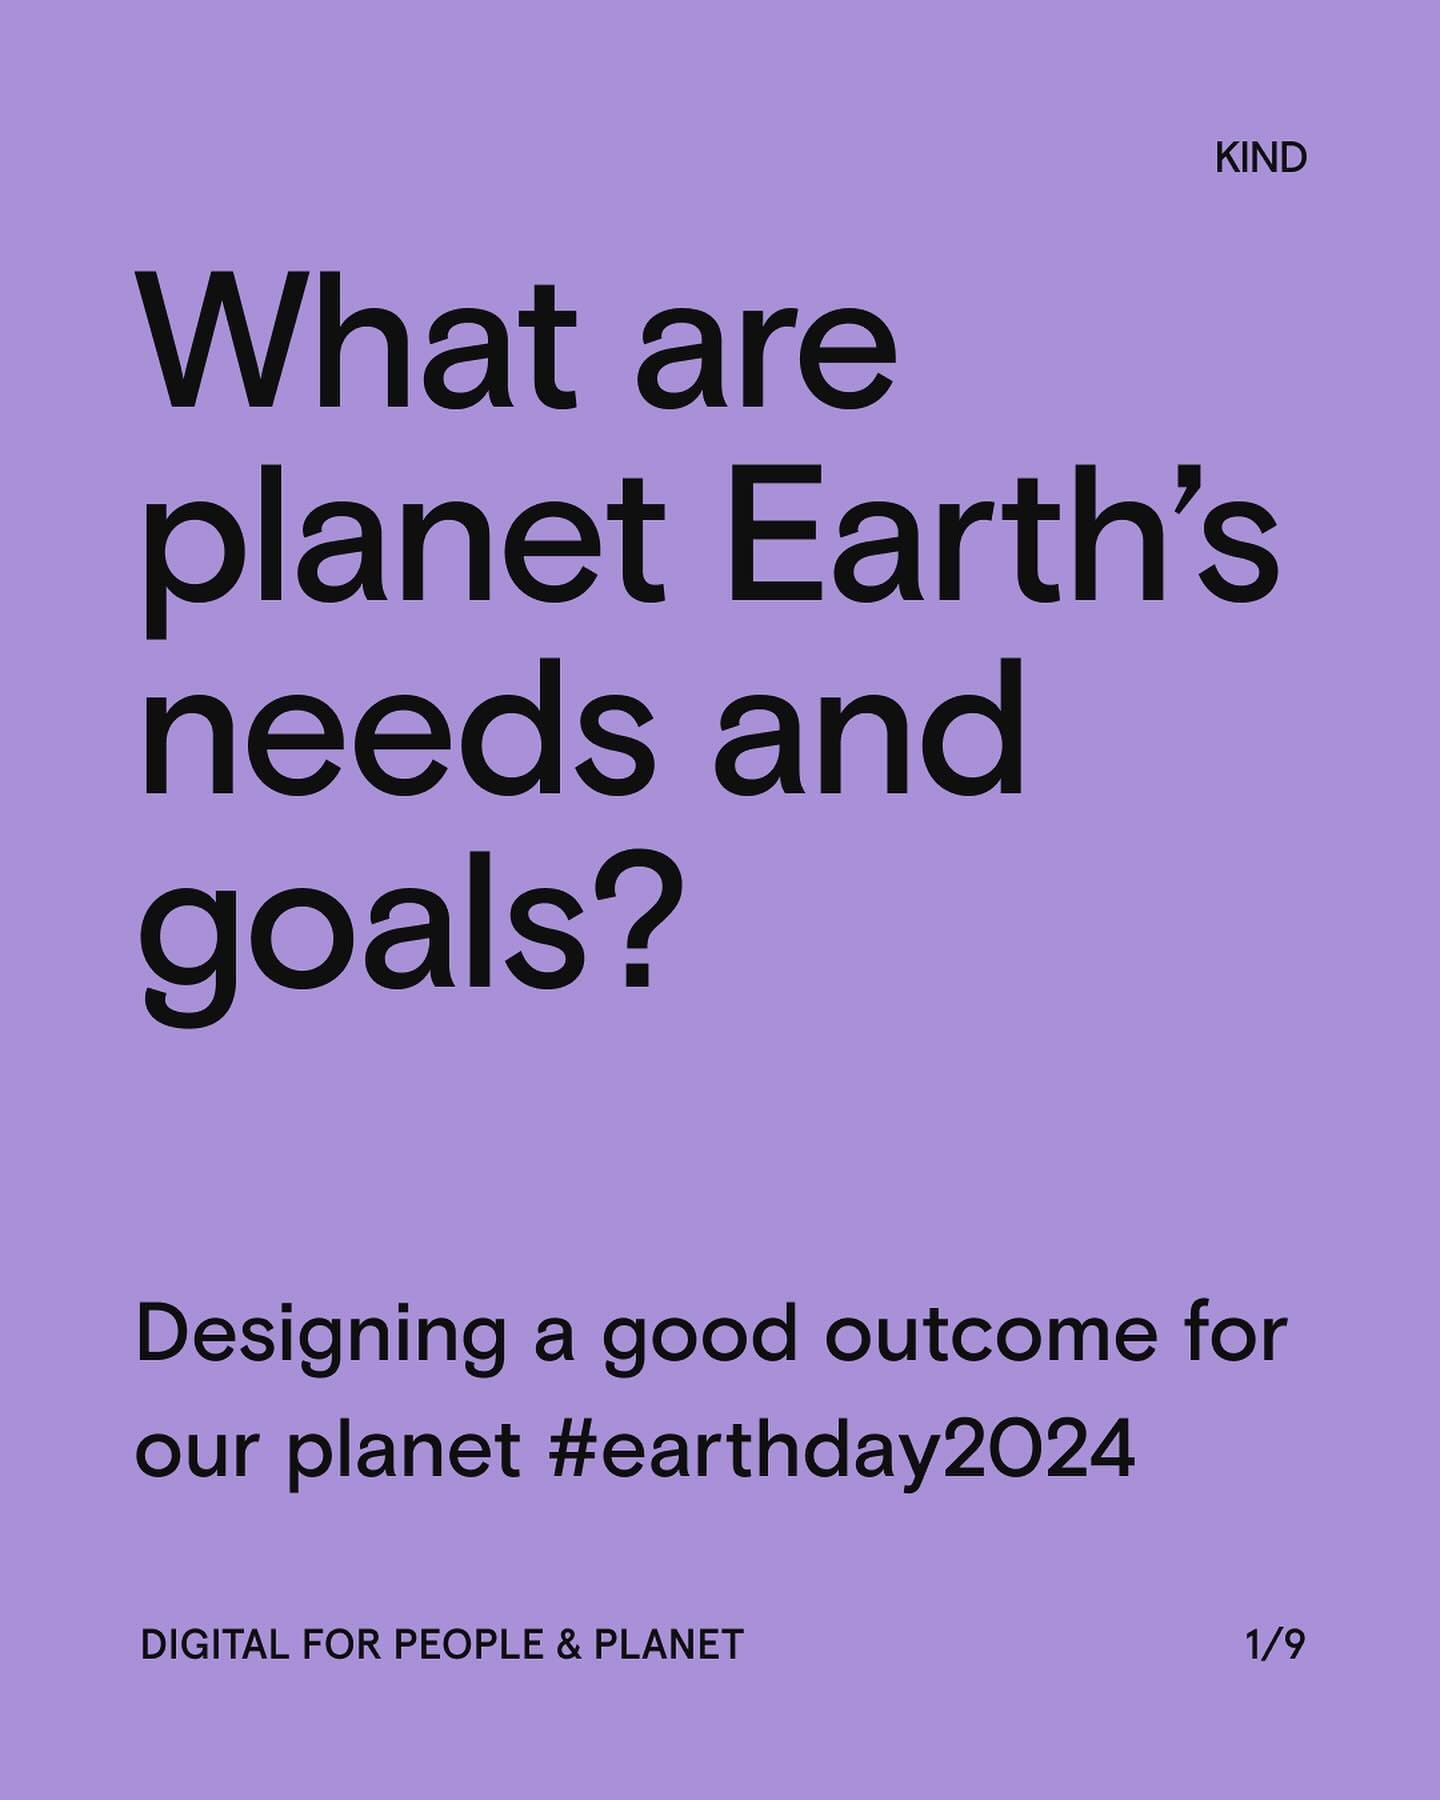 Let&rsquo;s celebrate Earth Day by imagining Earth as a stakeholder in a UX design project. What needs and goals might Earth have, and how could we meet them?

#Earthday2024 #EarthDay #sustainableUX #SustainableDesign #CarbonReduction #ClimateChange 